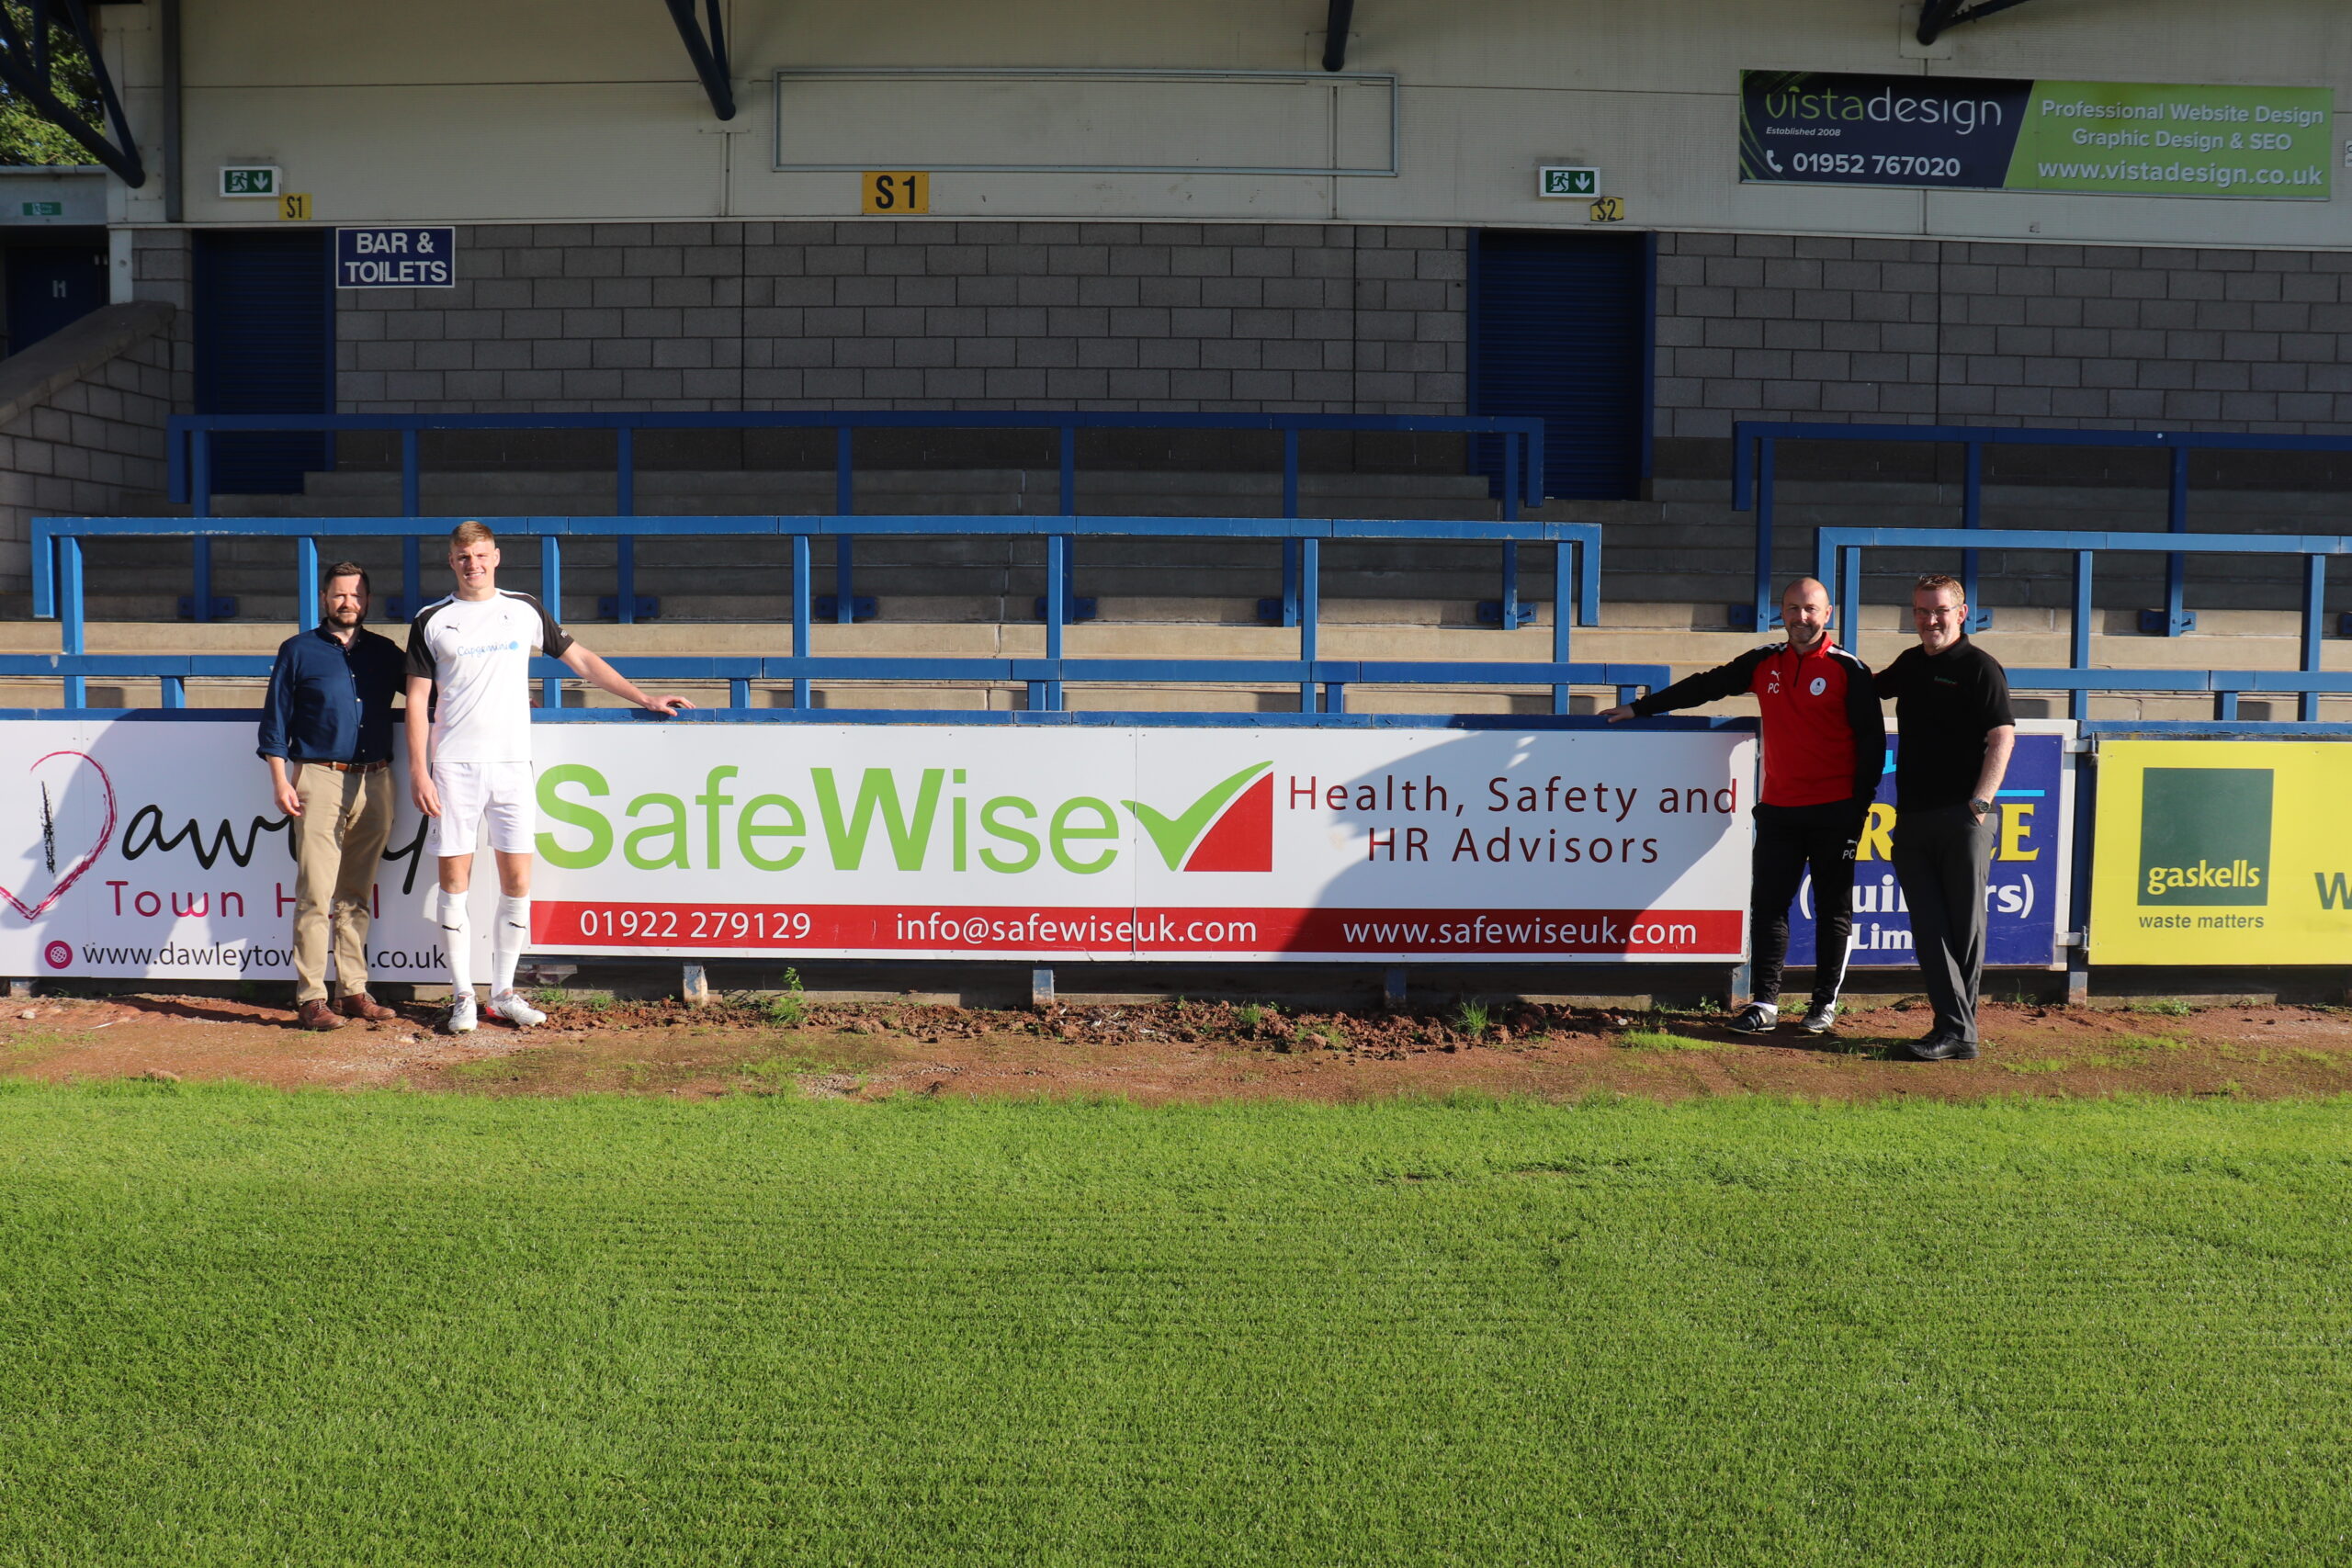 Safewise become commercial sponsor